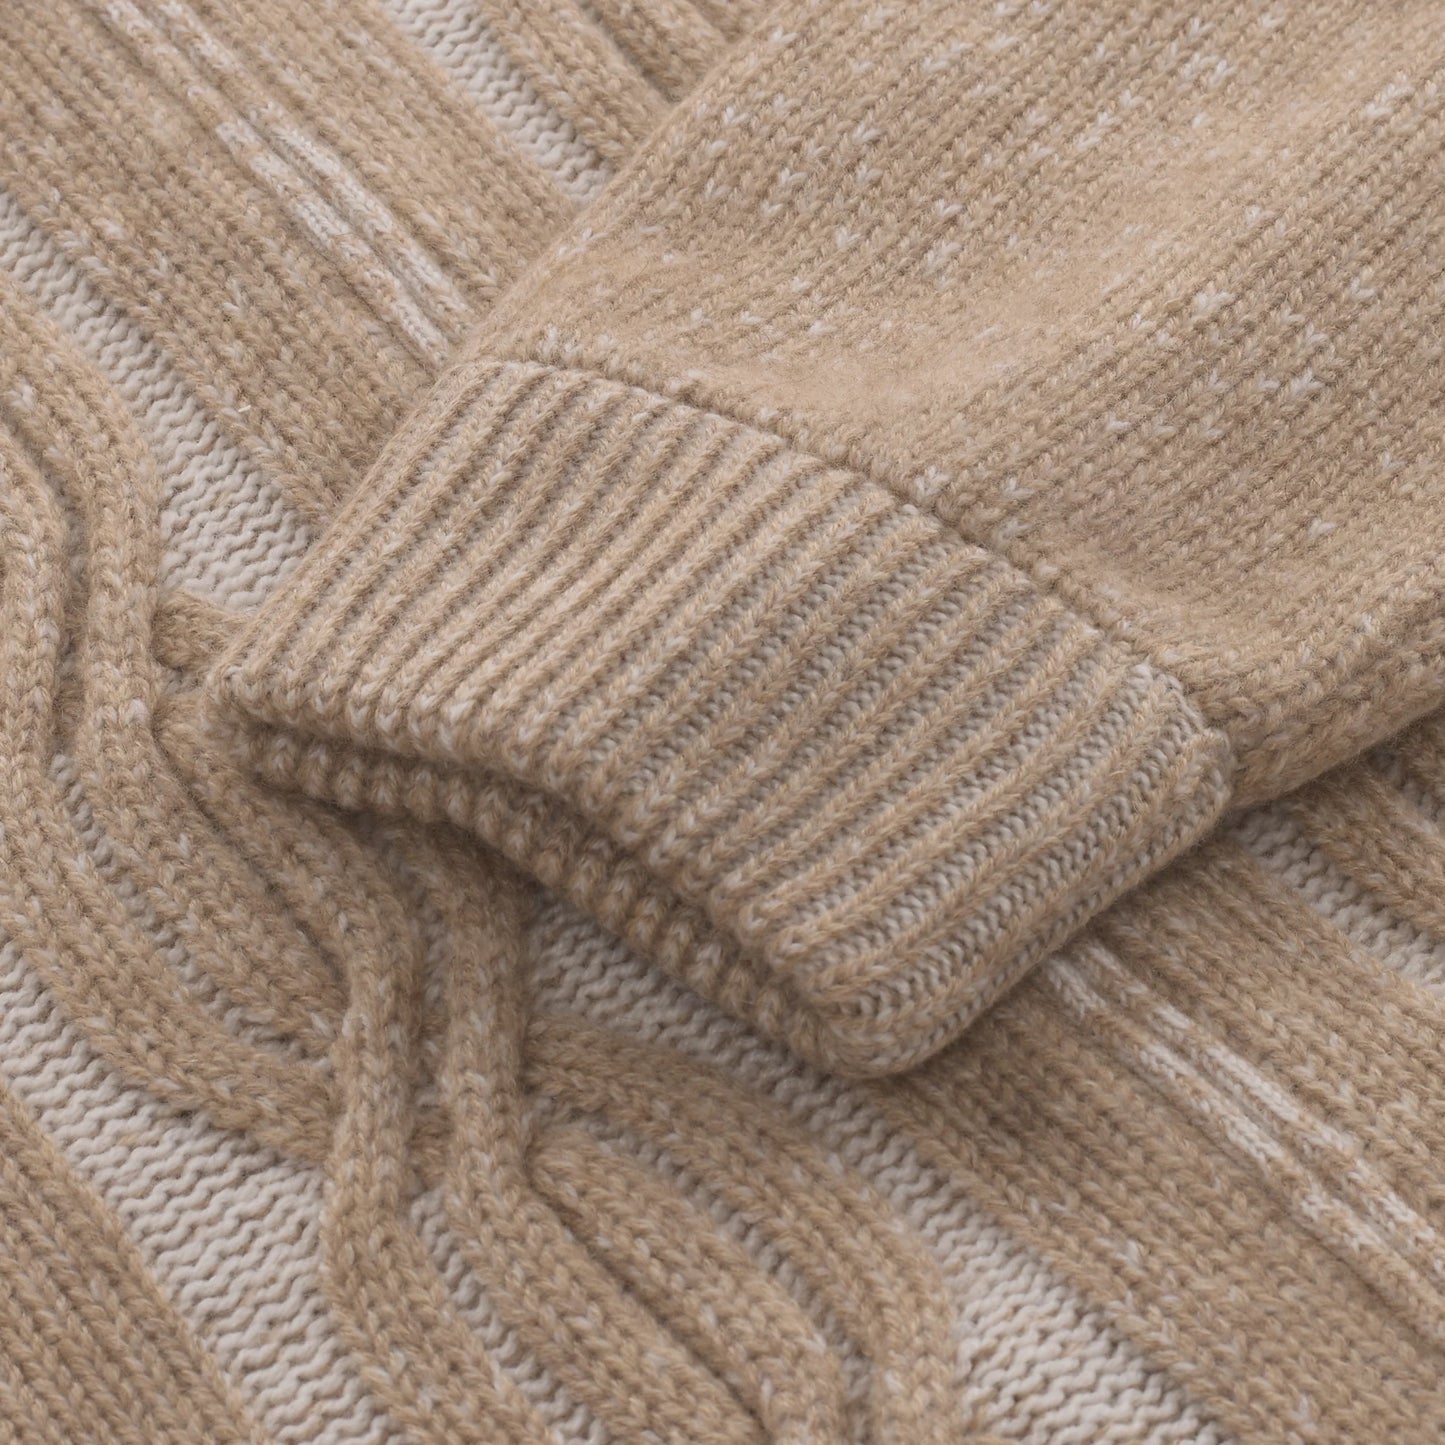 Cashmere Zip-Up Cardigan in Sand Brown